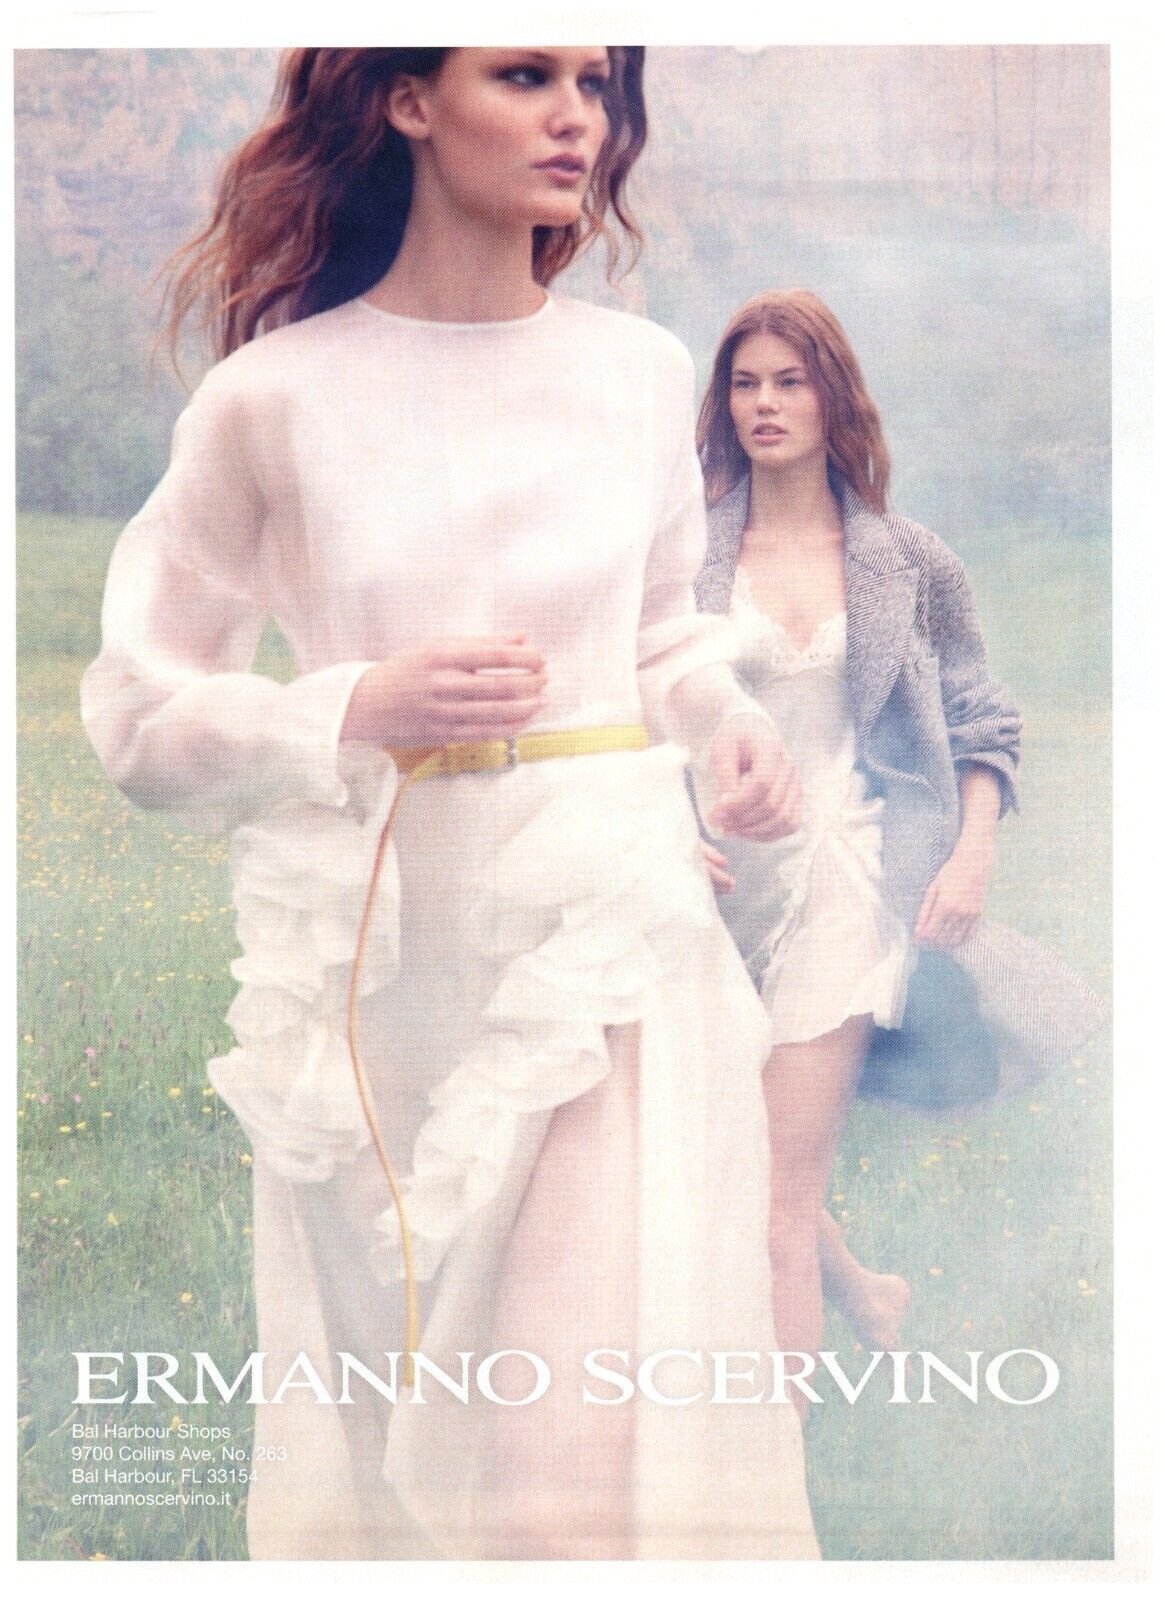 2018 Ermanno Scervino Print Ad Gorgeous Sexy Models Barefoot Field Lingerie Coat